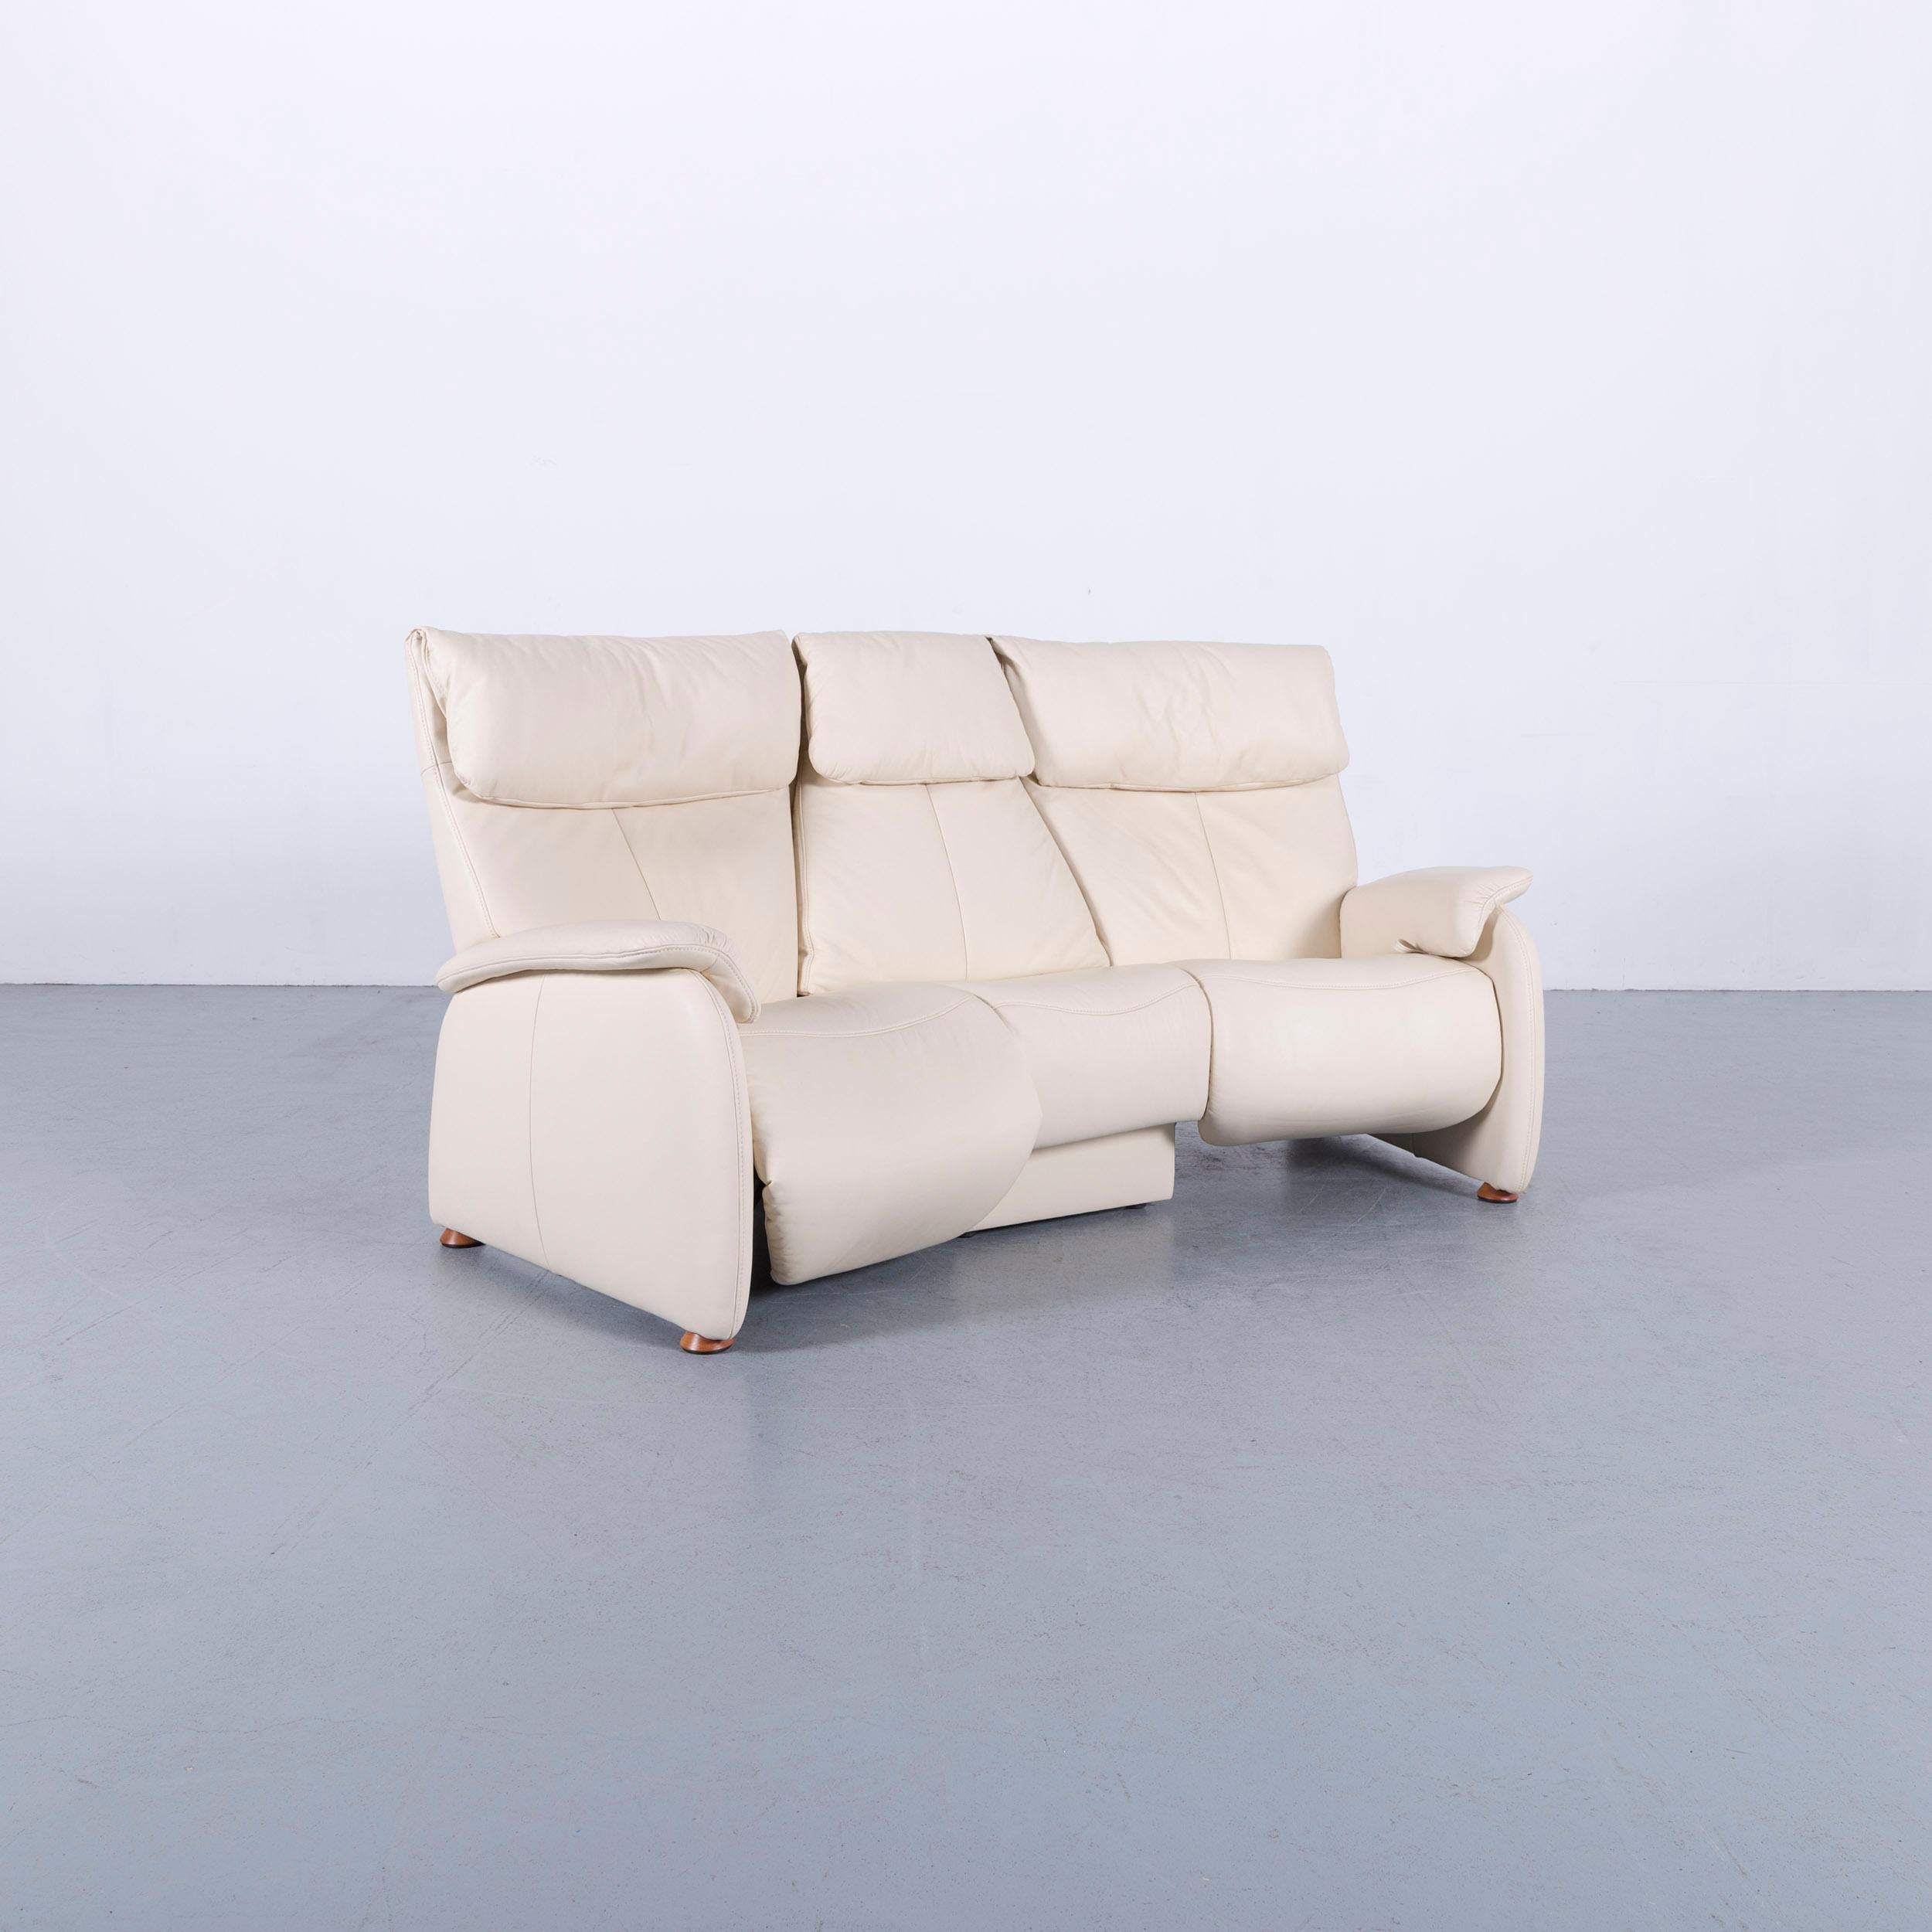 Leather Himolla Trapez Sofa Off-White Three-Seat Couch Recliner